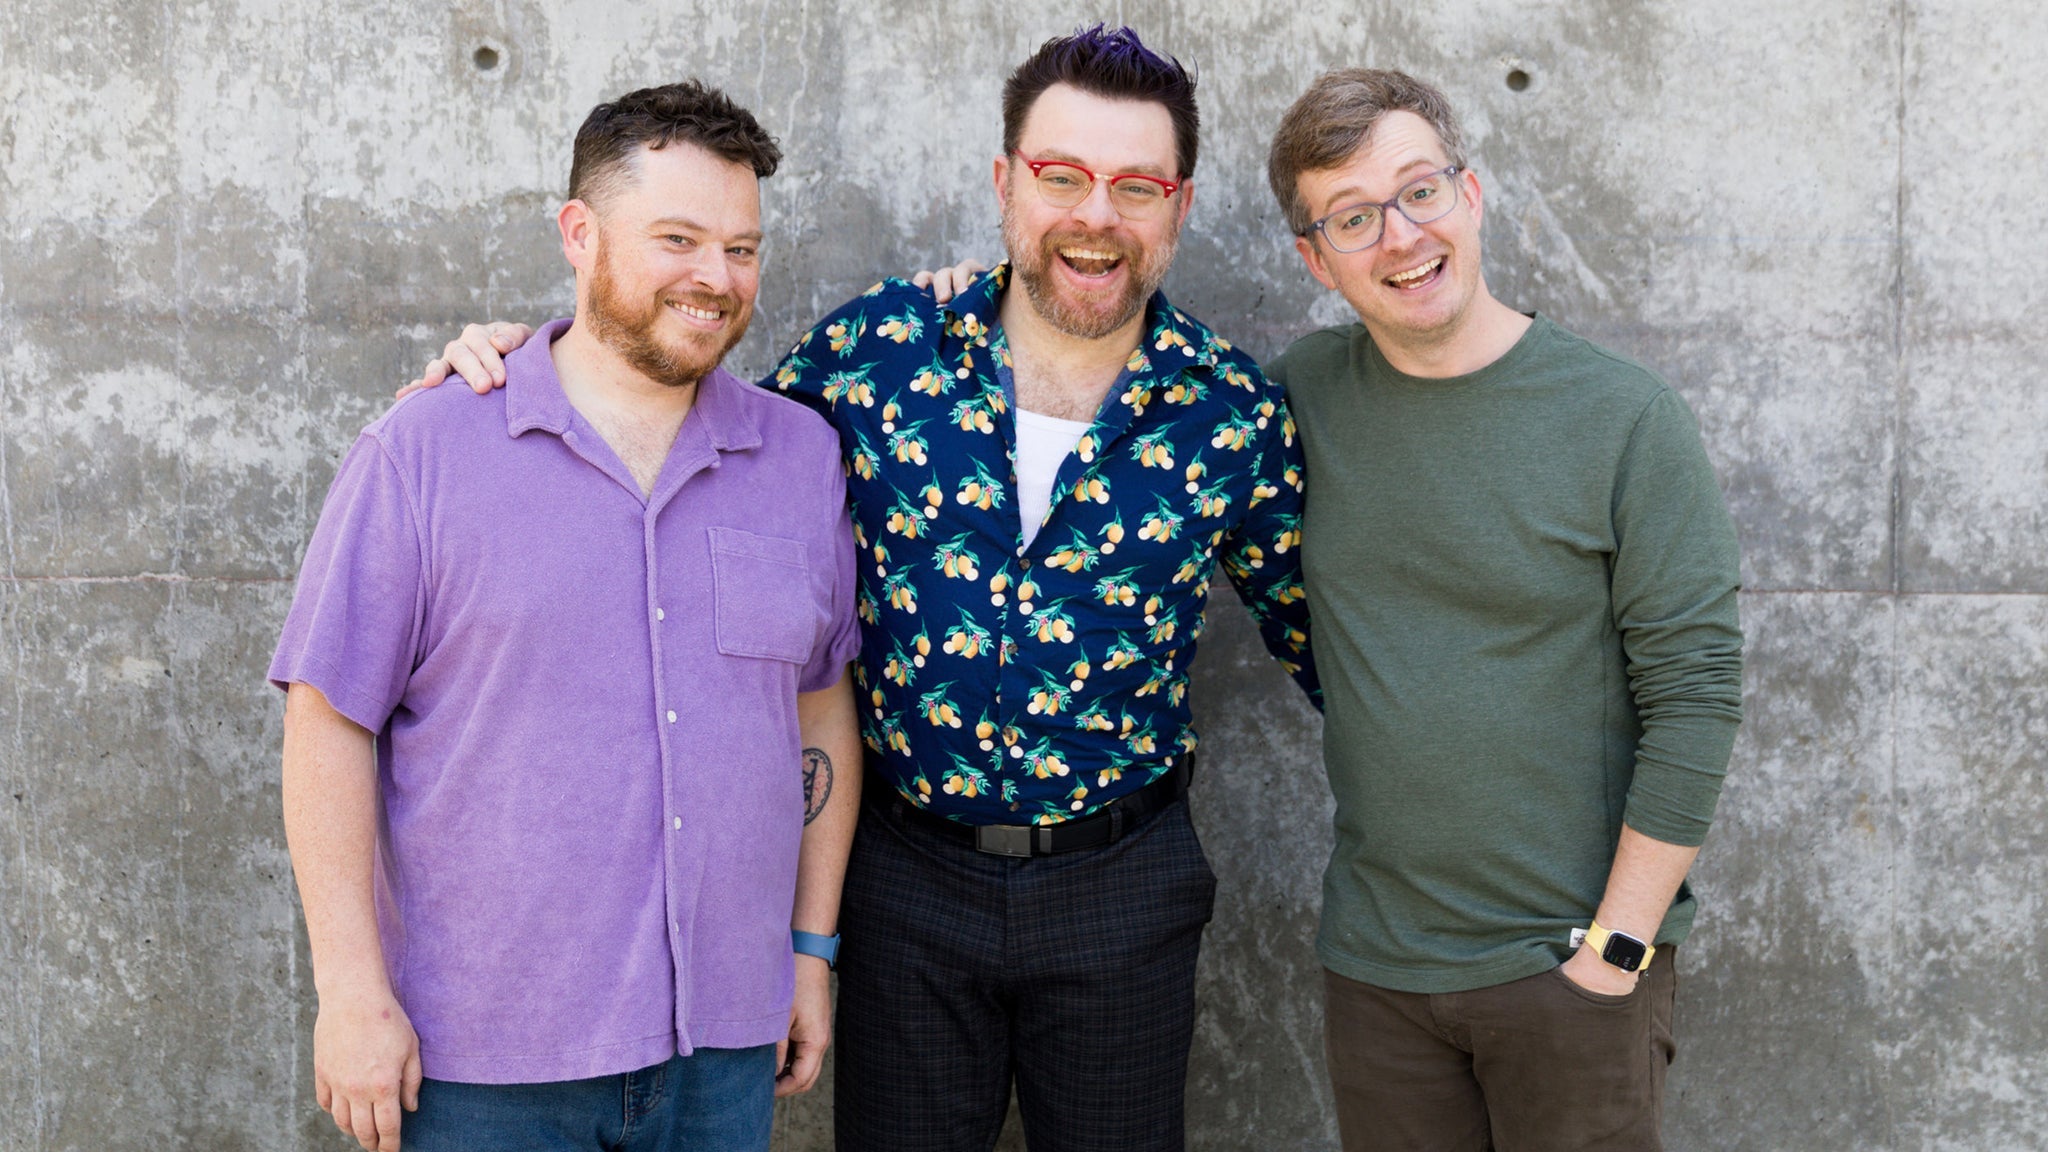 McElroys: My Brother, My Brother and Me in St. Louis promo photo for Official Platinum presale offer code